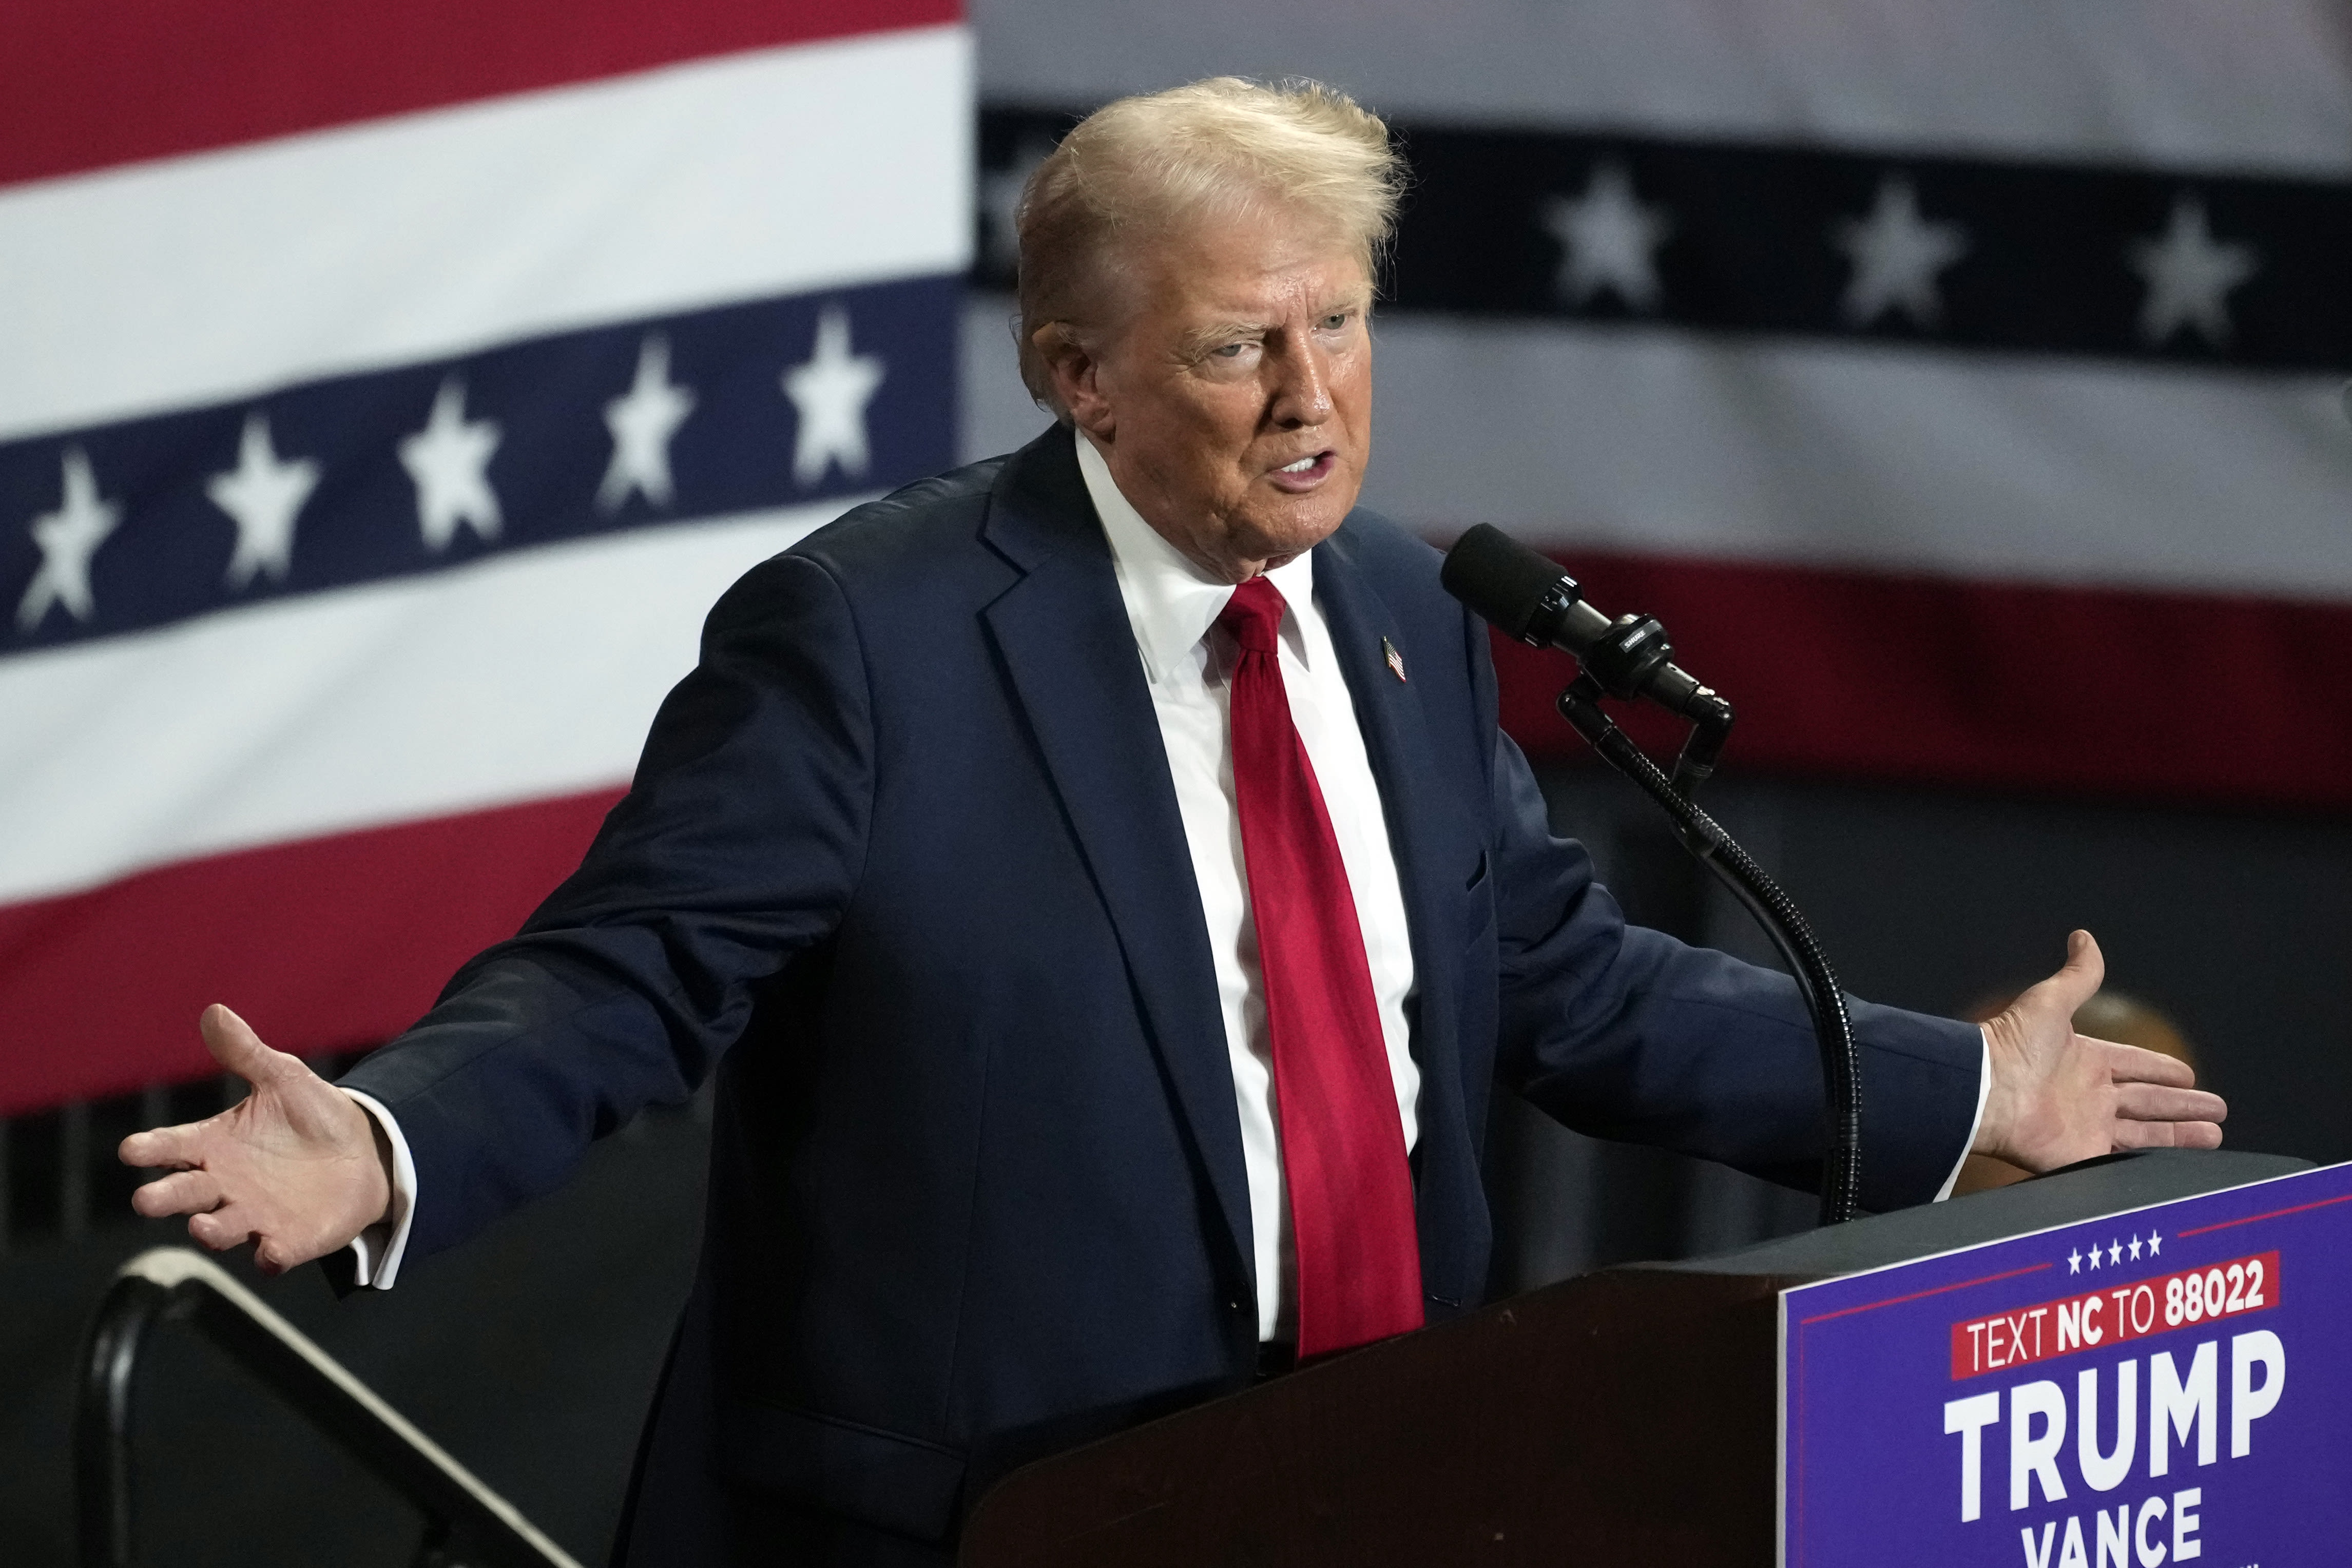 Trump struggles to find line of attack against Harris: ‘They are literally grasping at straws’